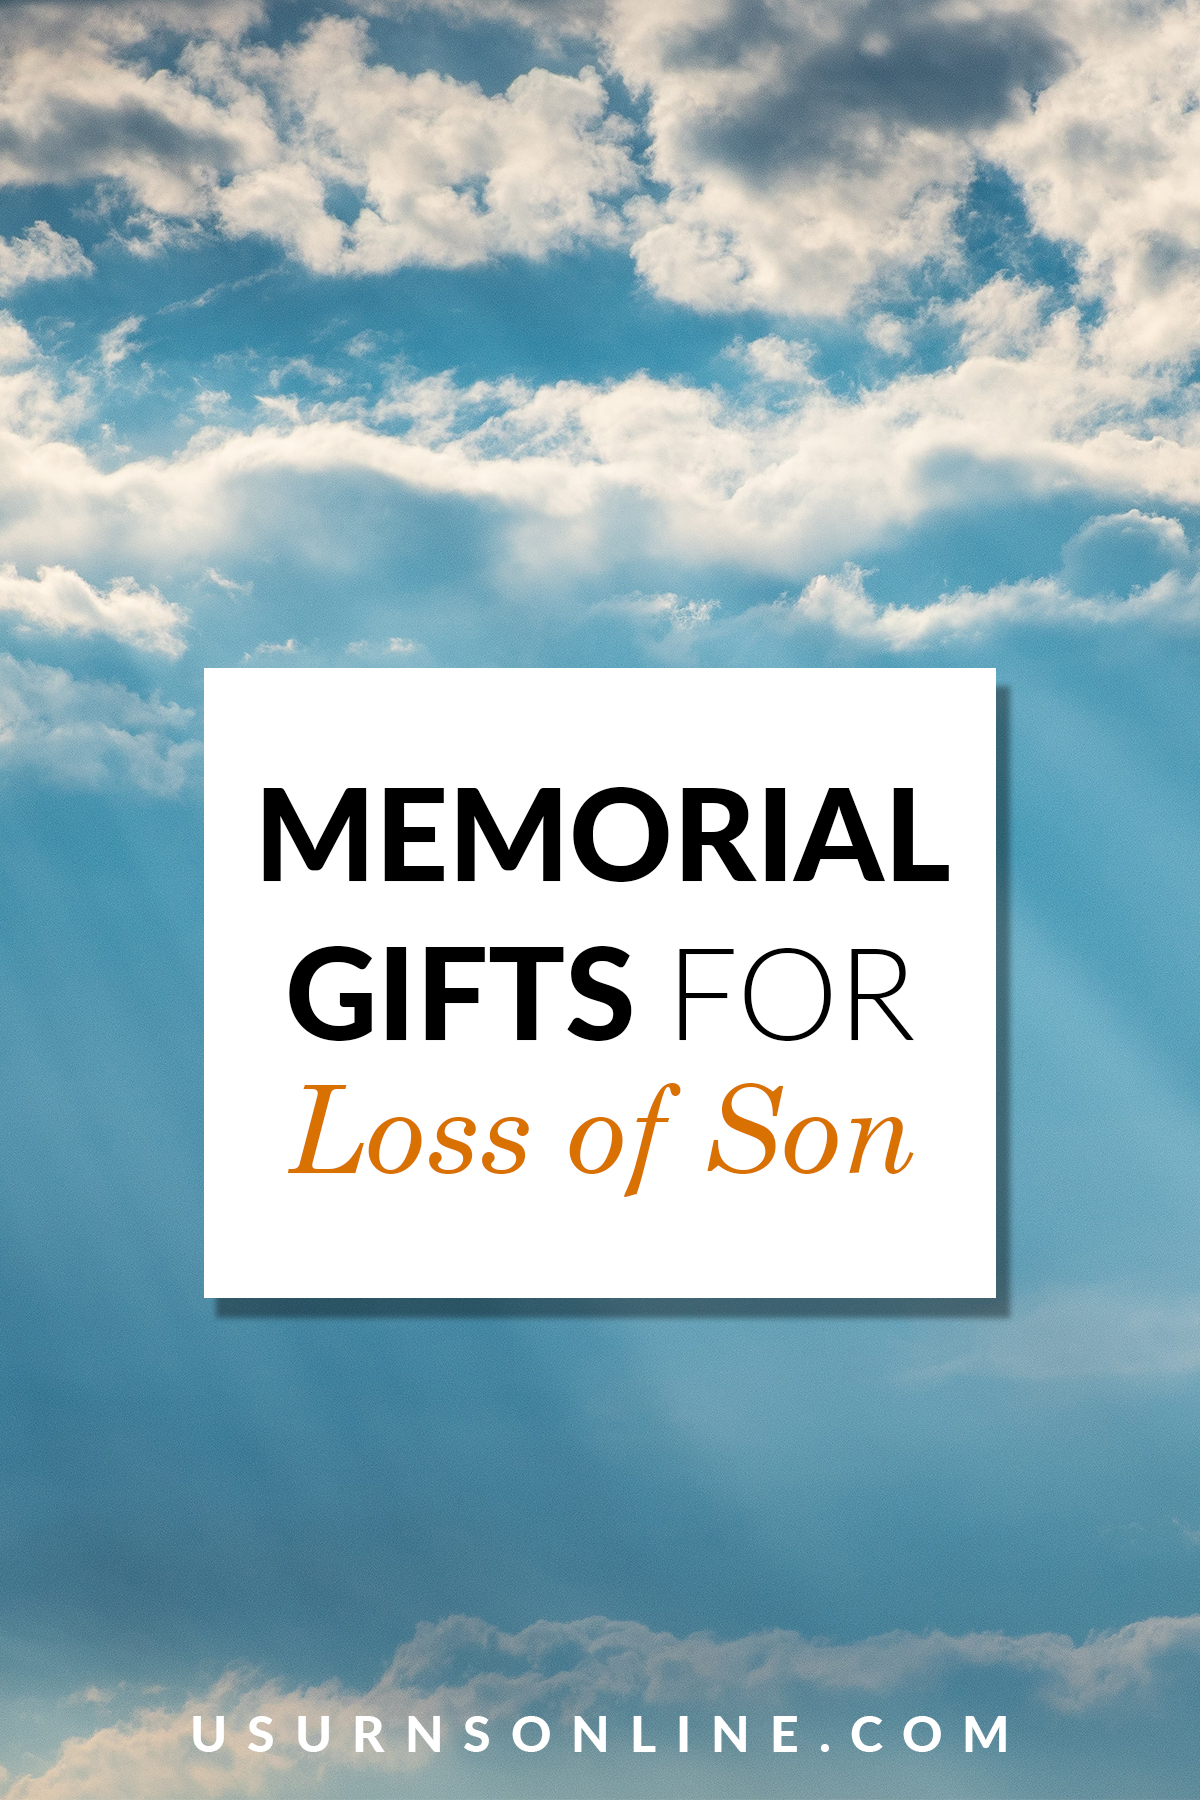 memorial gifts for loss of son - feature image